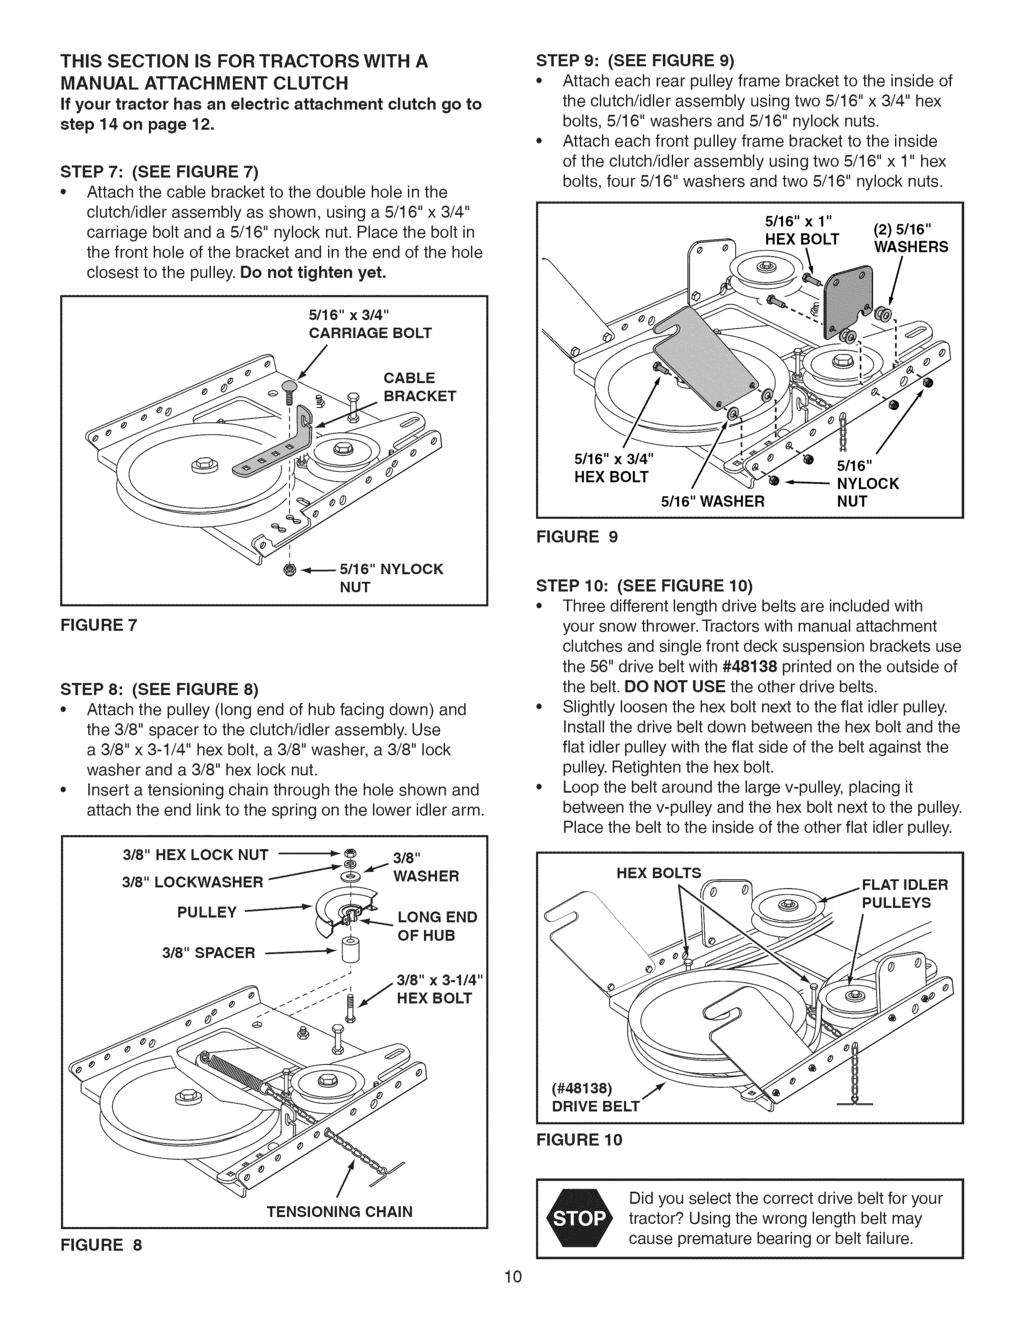 THIS SECTION IS FOR TRACTORS WITH A MAN UAL ATTACHM ENT CLUTCH if your tractor has an electric attachment clutch go to step 4 on page 2.